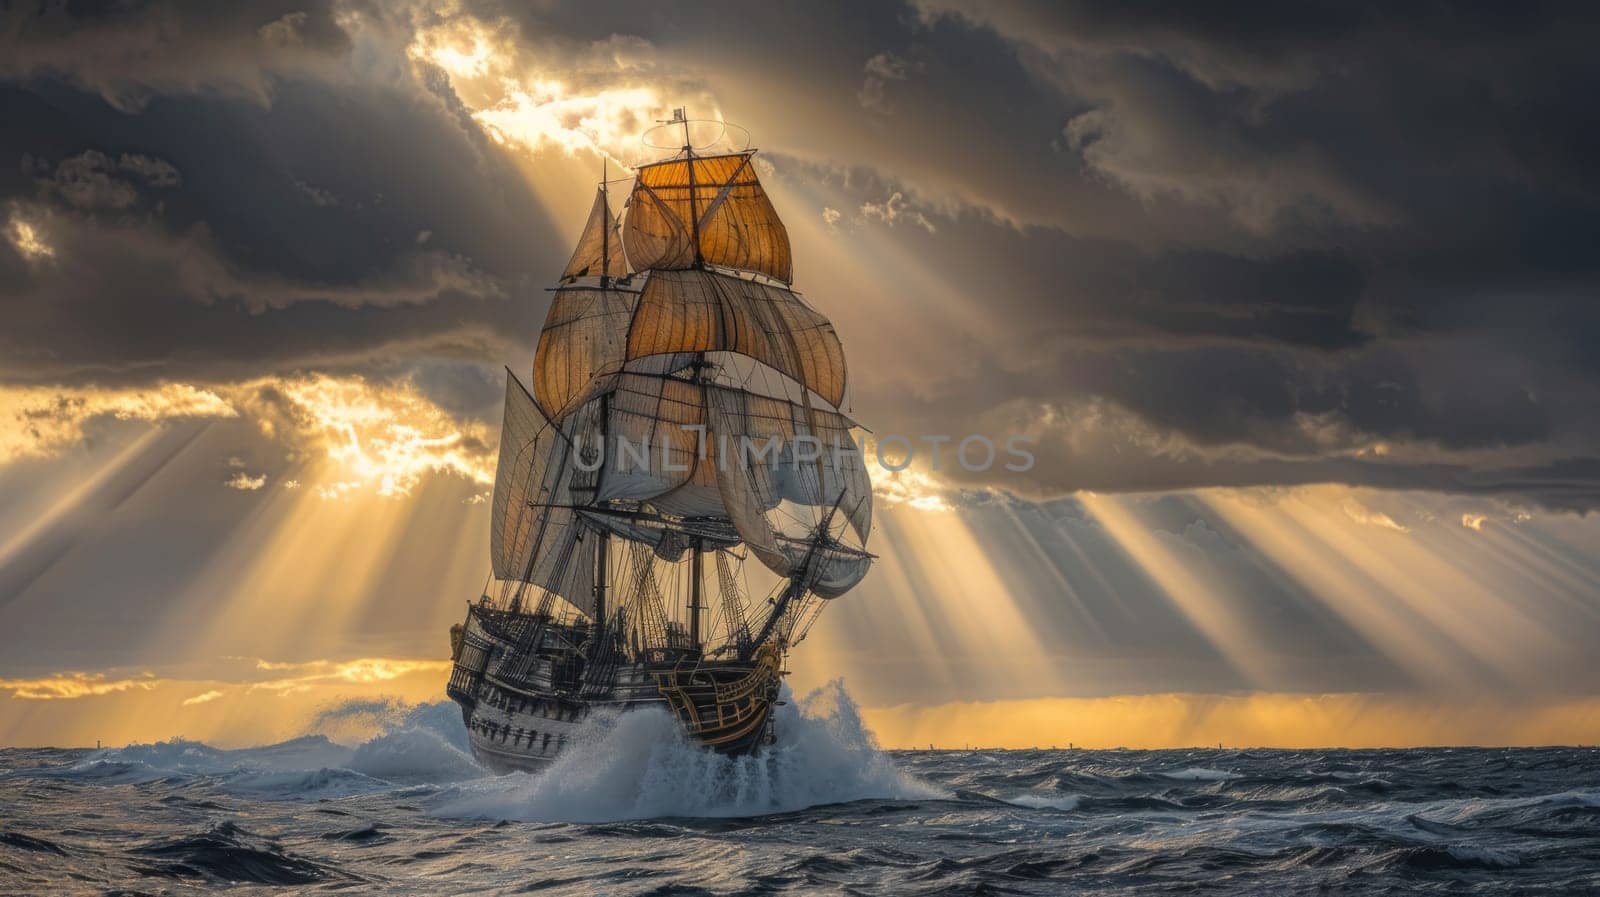 A classic schooner gracefully sails through rough ocean waters under a dramatic cloudy sky, showcasing the power and beauty of nature by but_photo